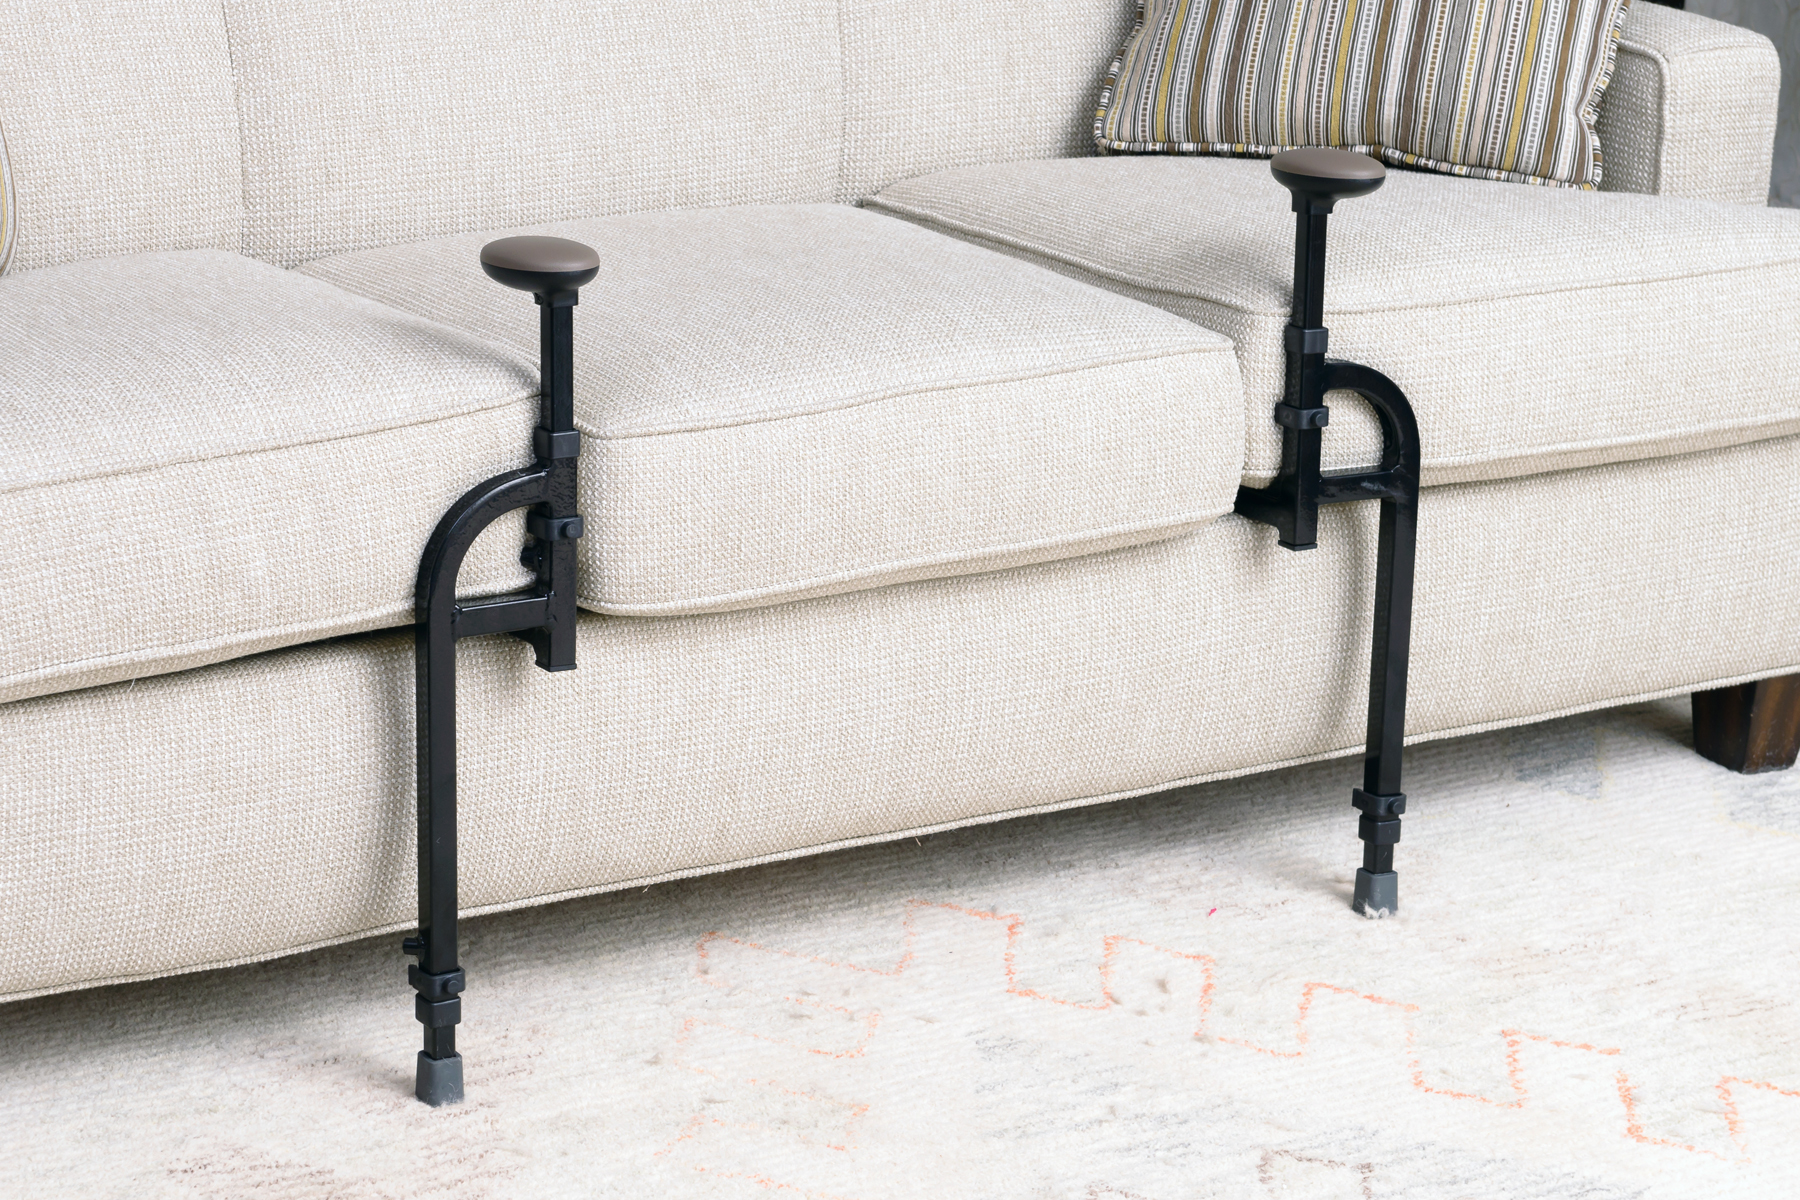 Stander Couch Cane, Safety Support Standing Mobility Aid for